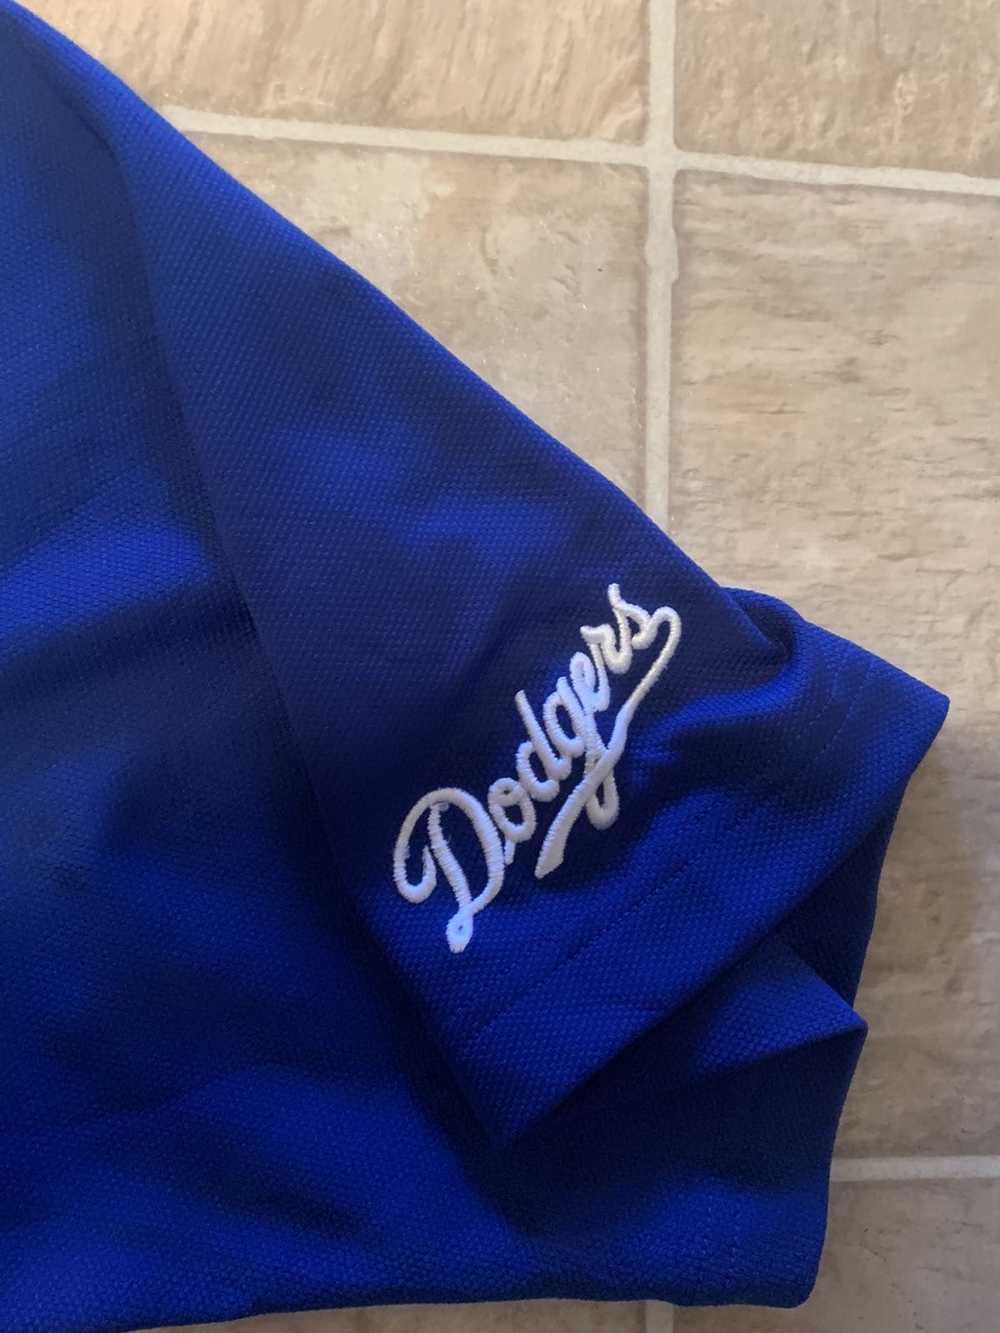 Tommy Bahama Los Angeles Dodgers 2010 Embroidered Shirt XLX